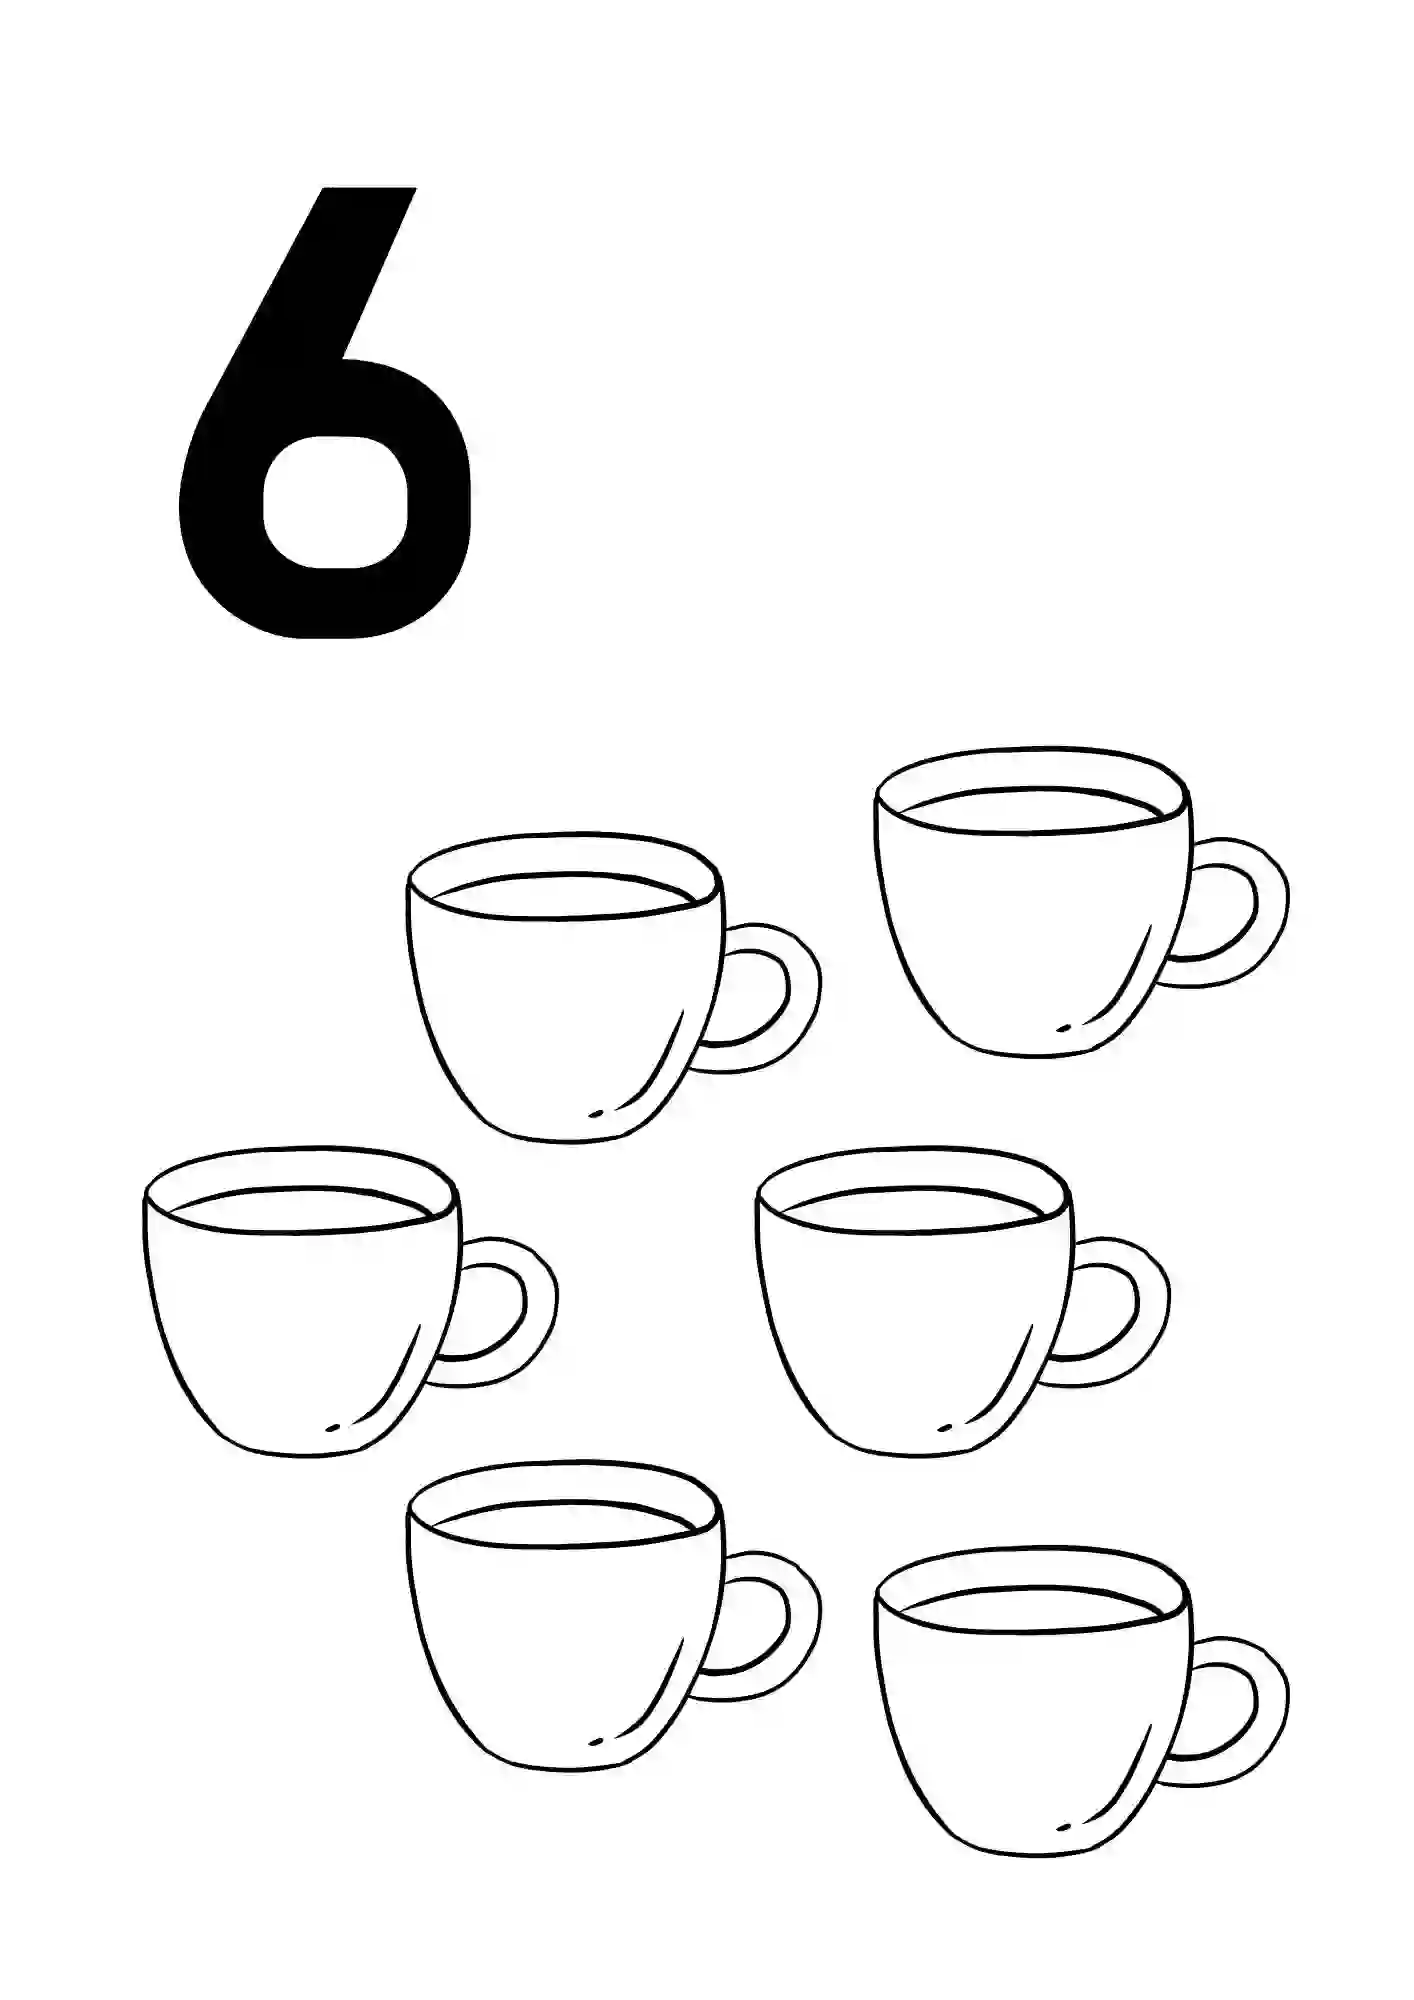 Count And Color Worksheets 1-10 (NUMBER 6)